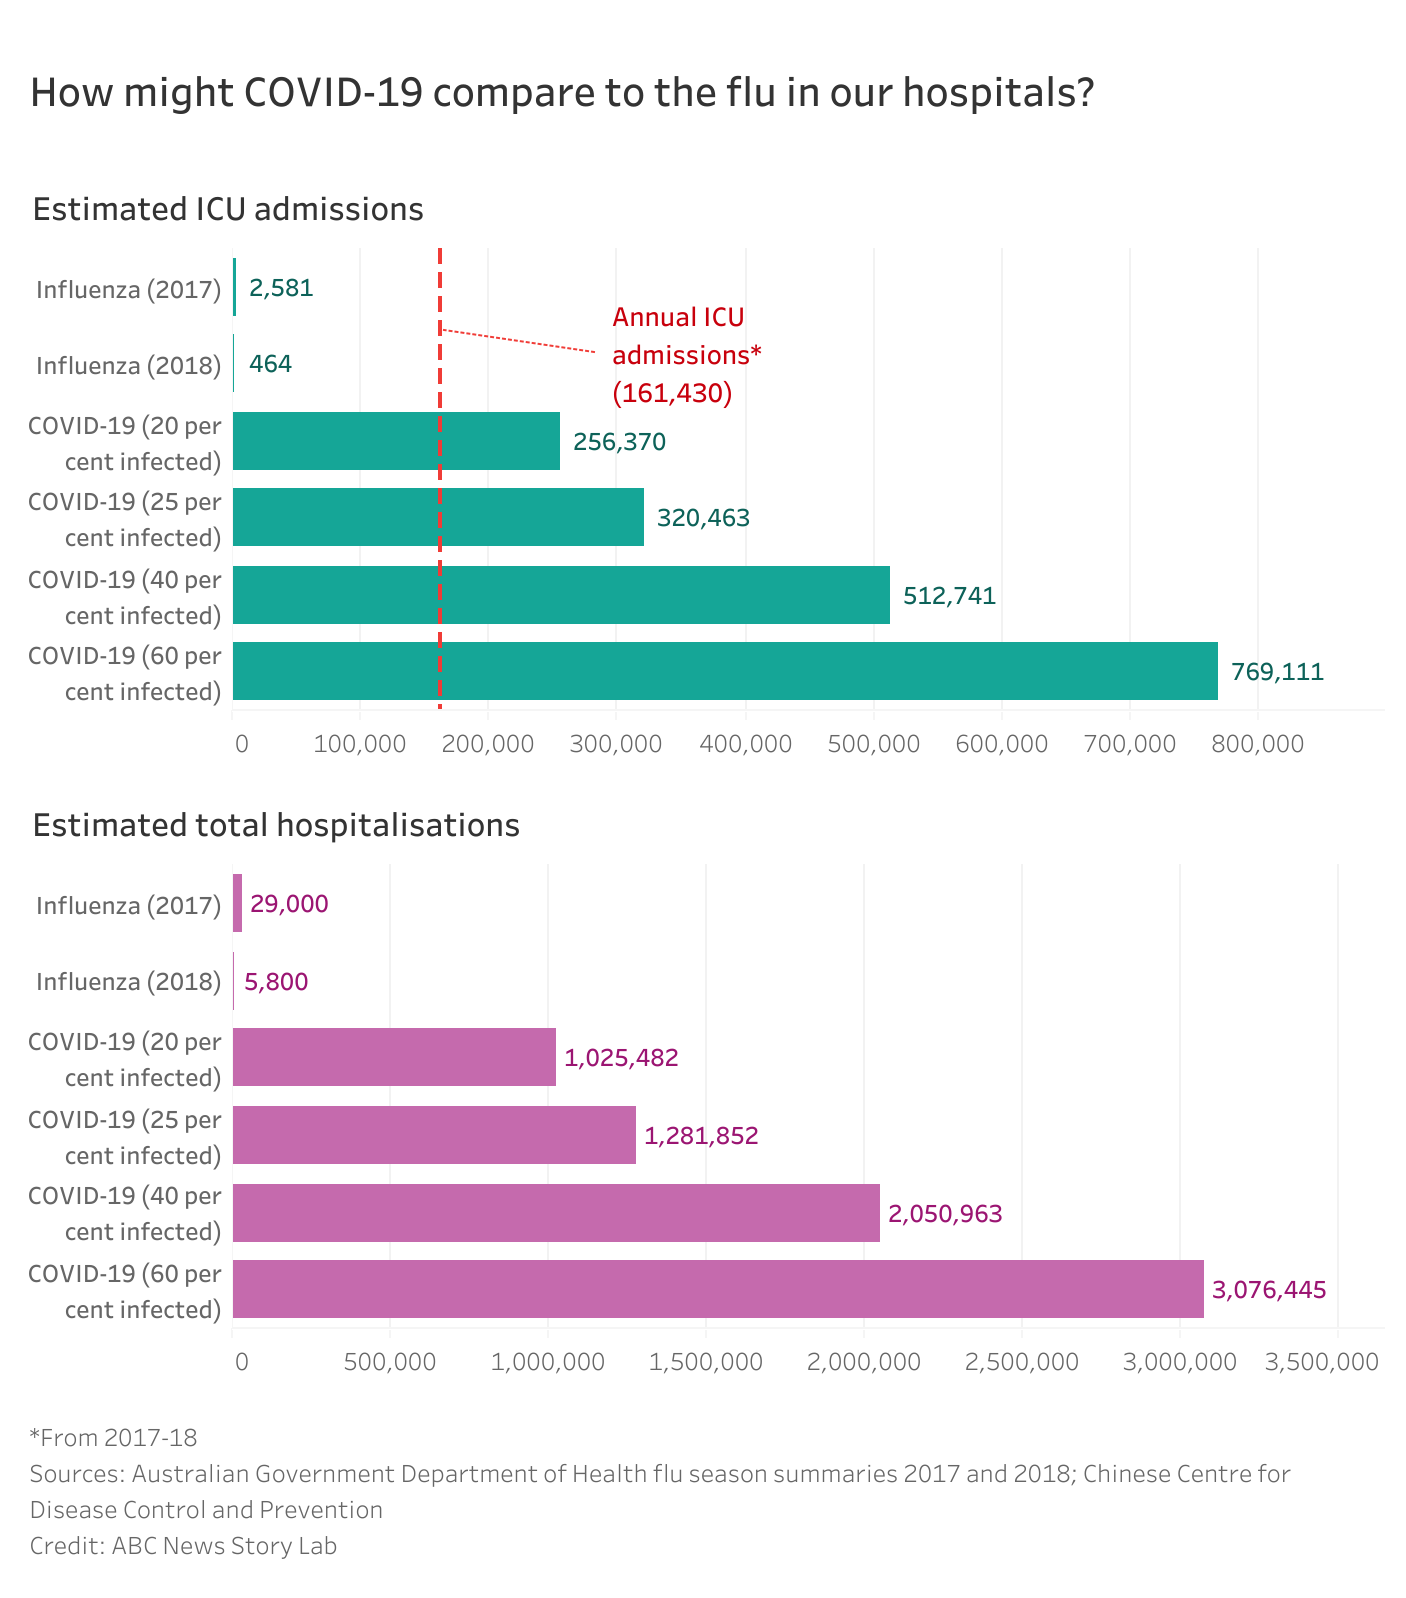 A chart comparing flu hospital admissions with projected COVID admissions